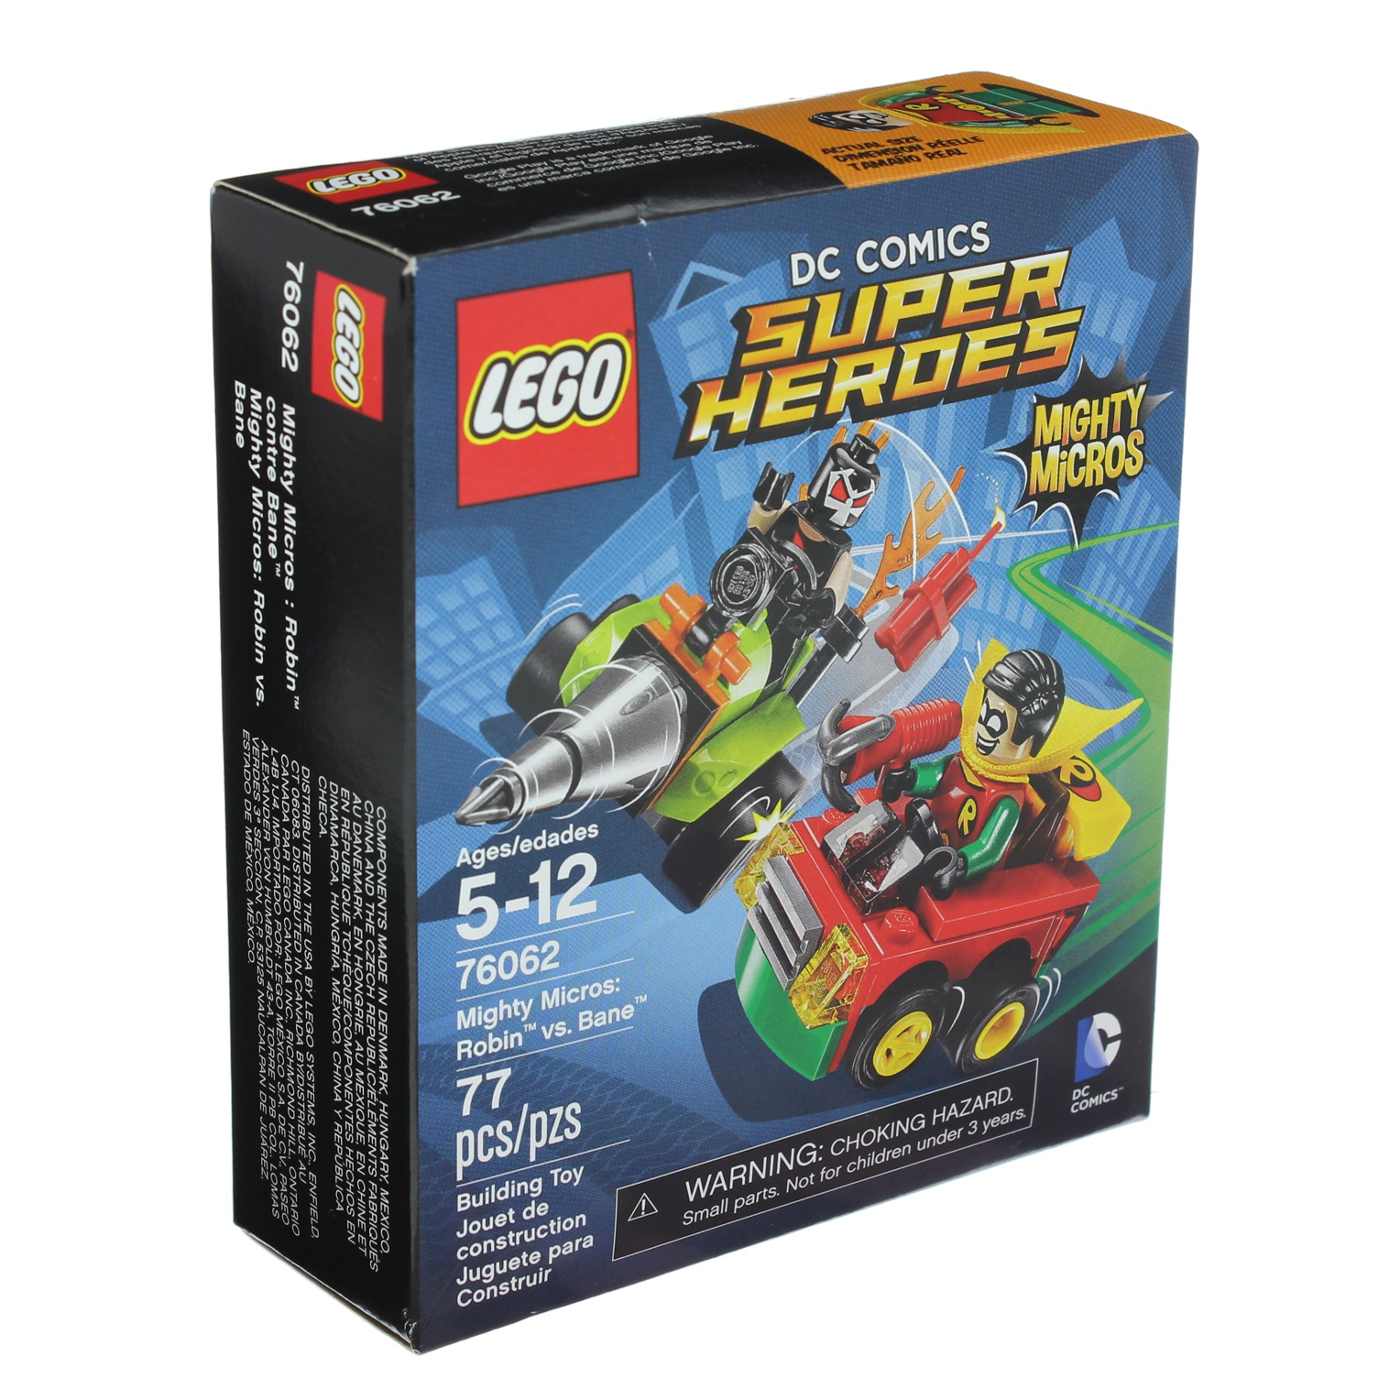 LEGO DC Comics Super Heroes Mighty Micros; image 1 of 2